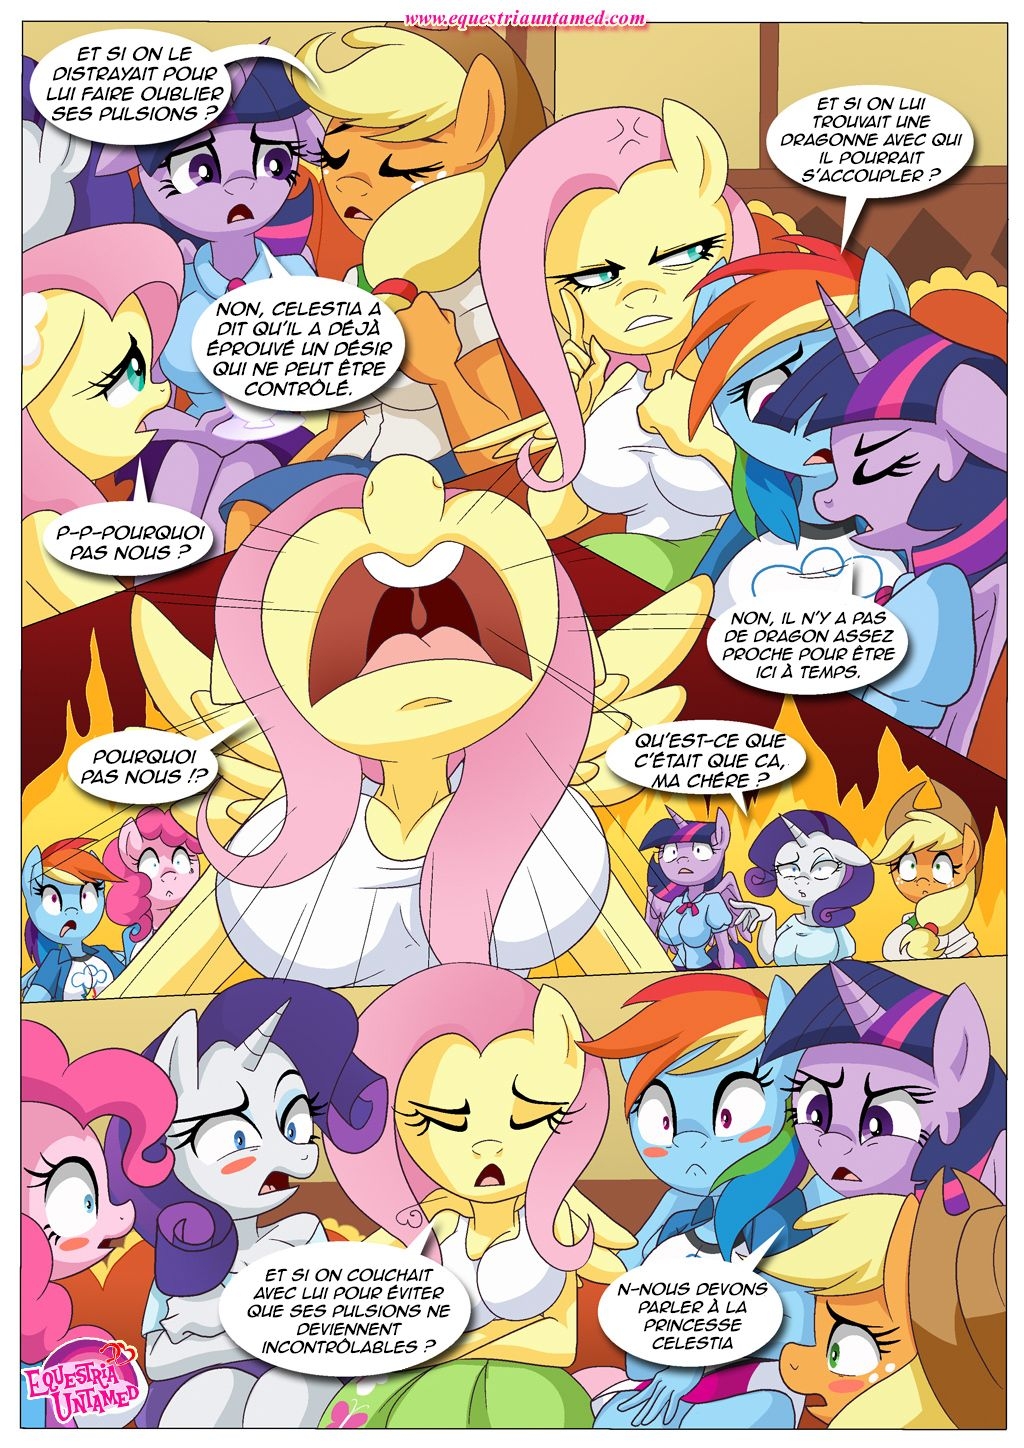 [Palcomix] The Power Of Dragon Mating (My Little Pony Friendship Is Magic) [French] [Melotan] 18